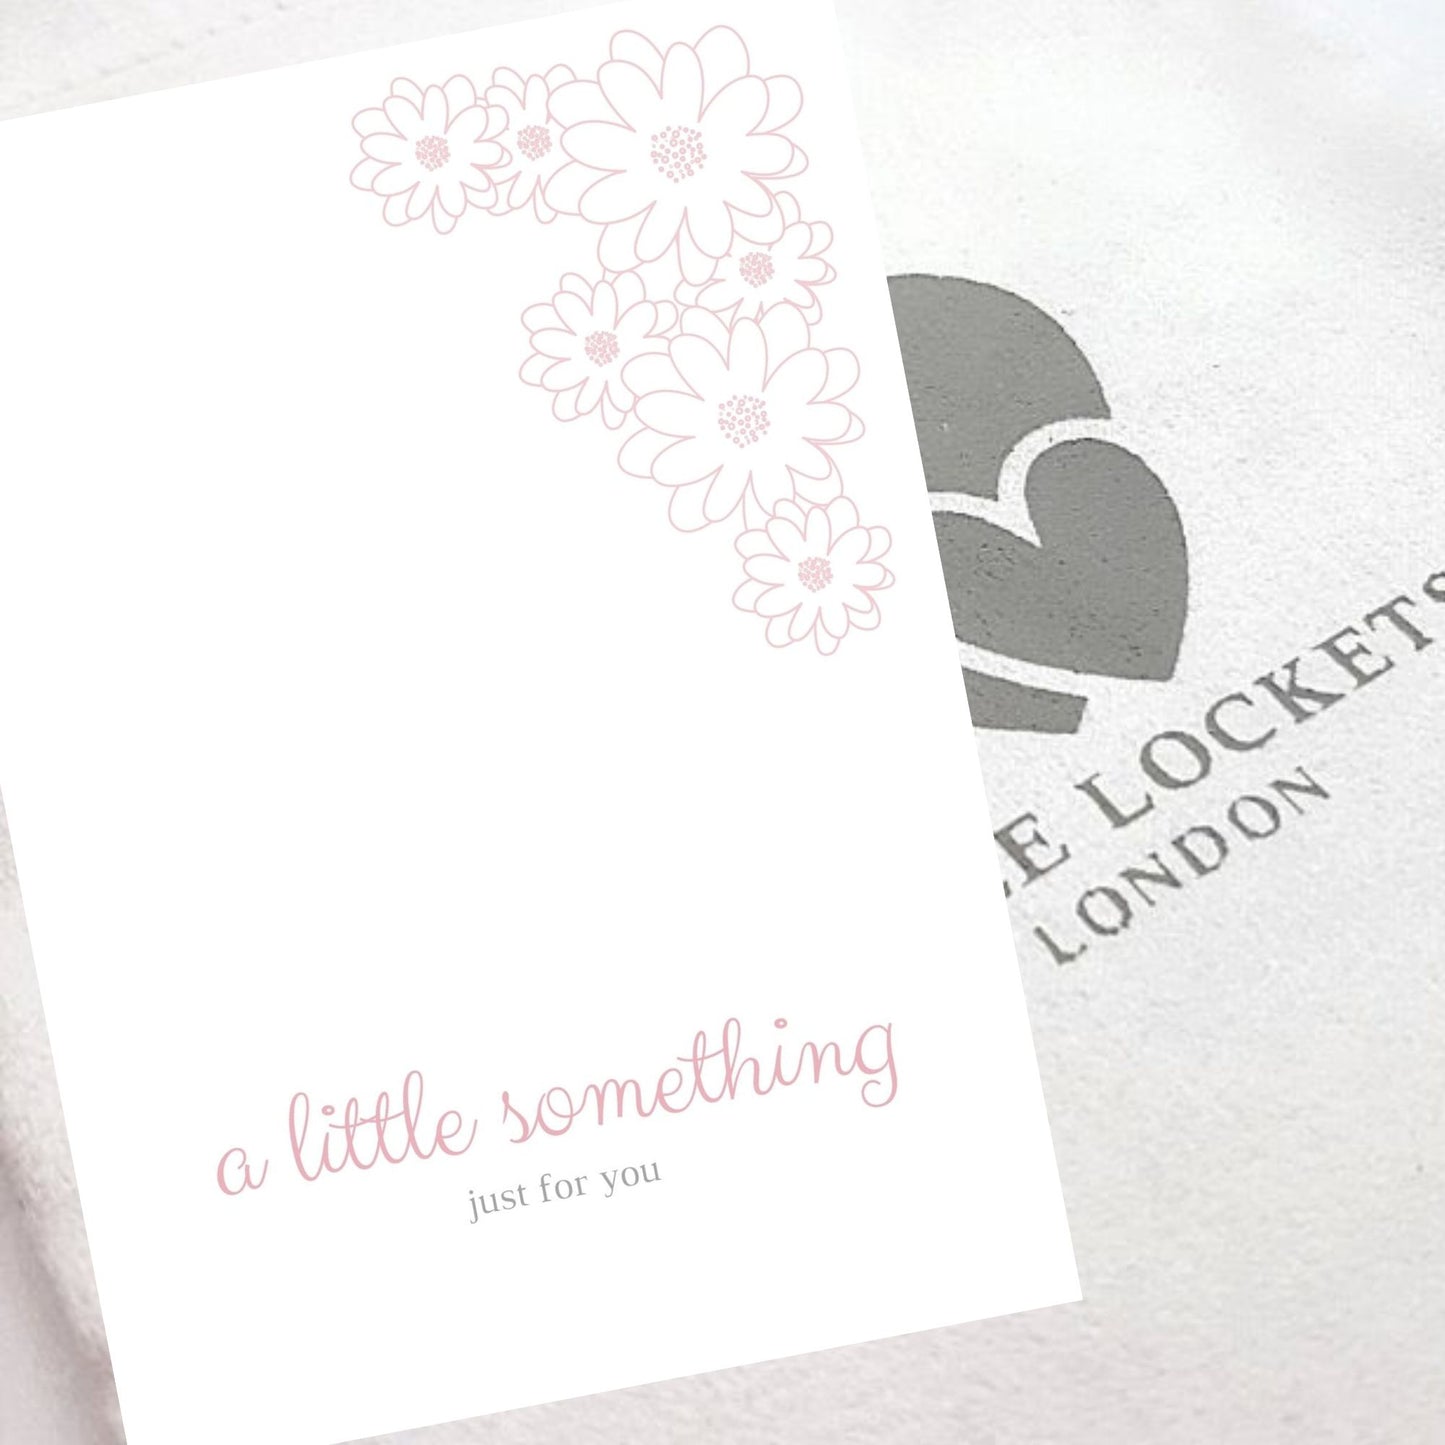 Gift card "A little something just for you" shown with luxury gift pouch